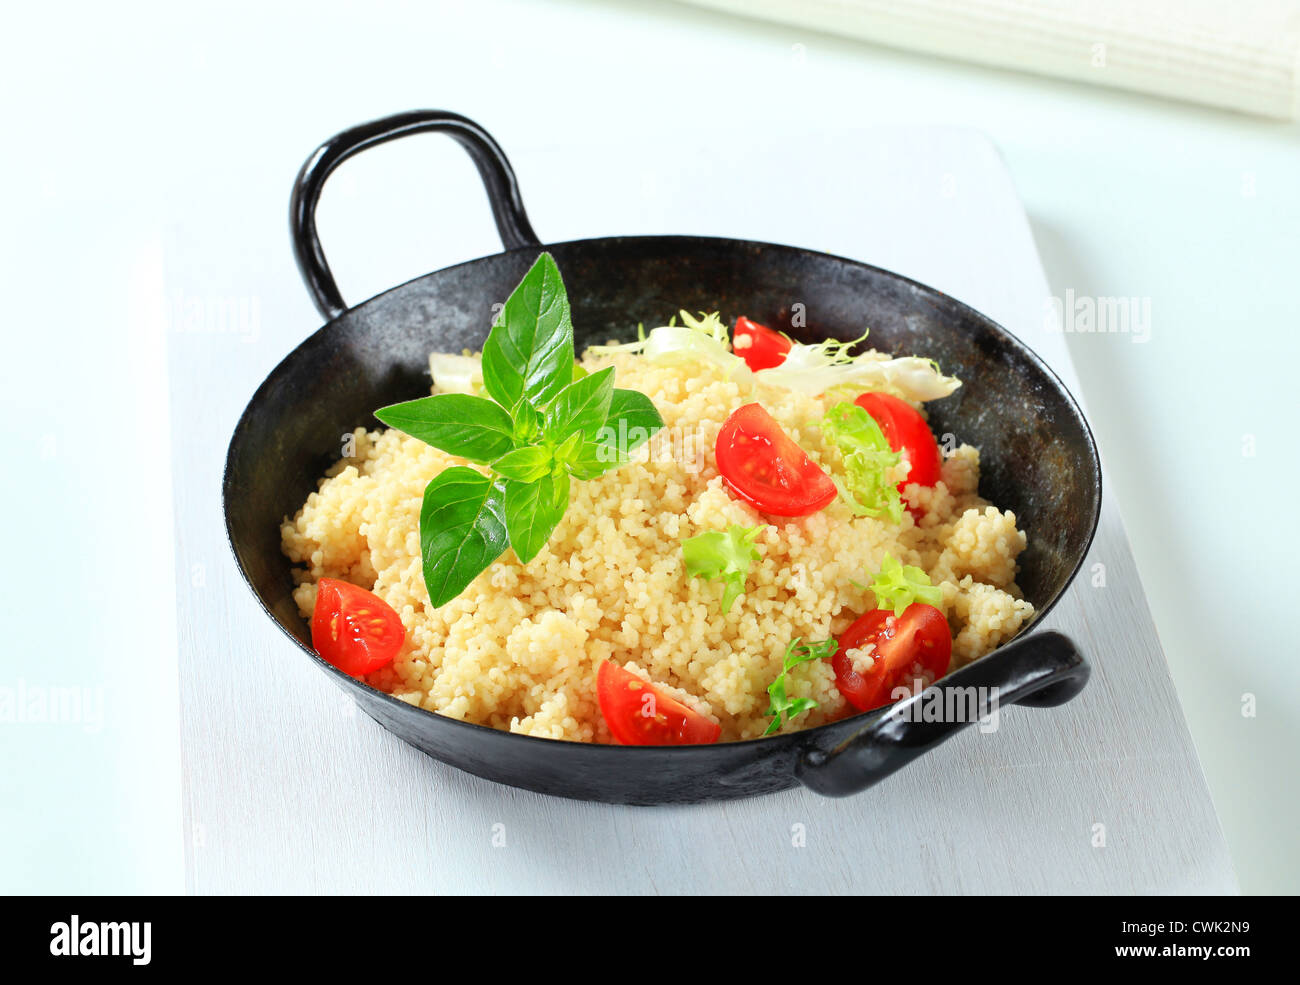 Couscous with salad greens and tomato in a pan Stock Photo